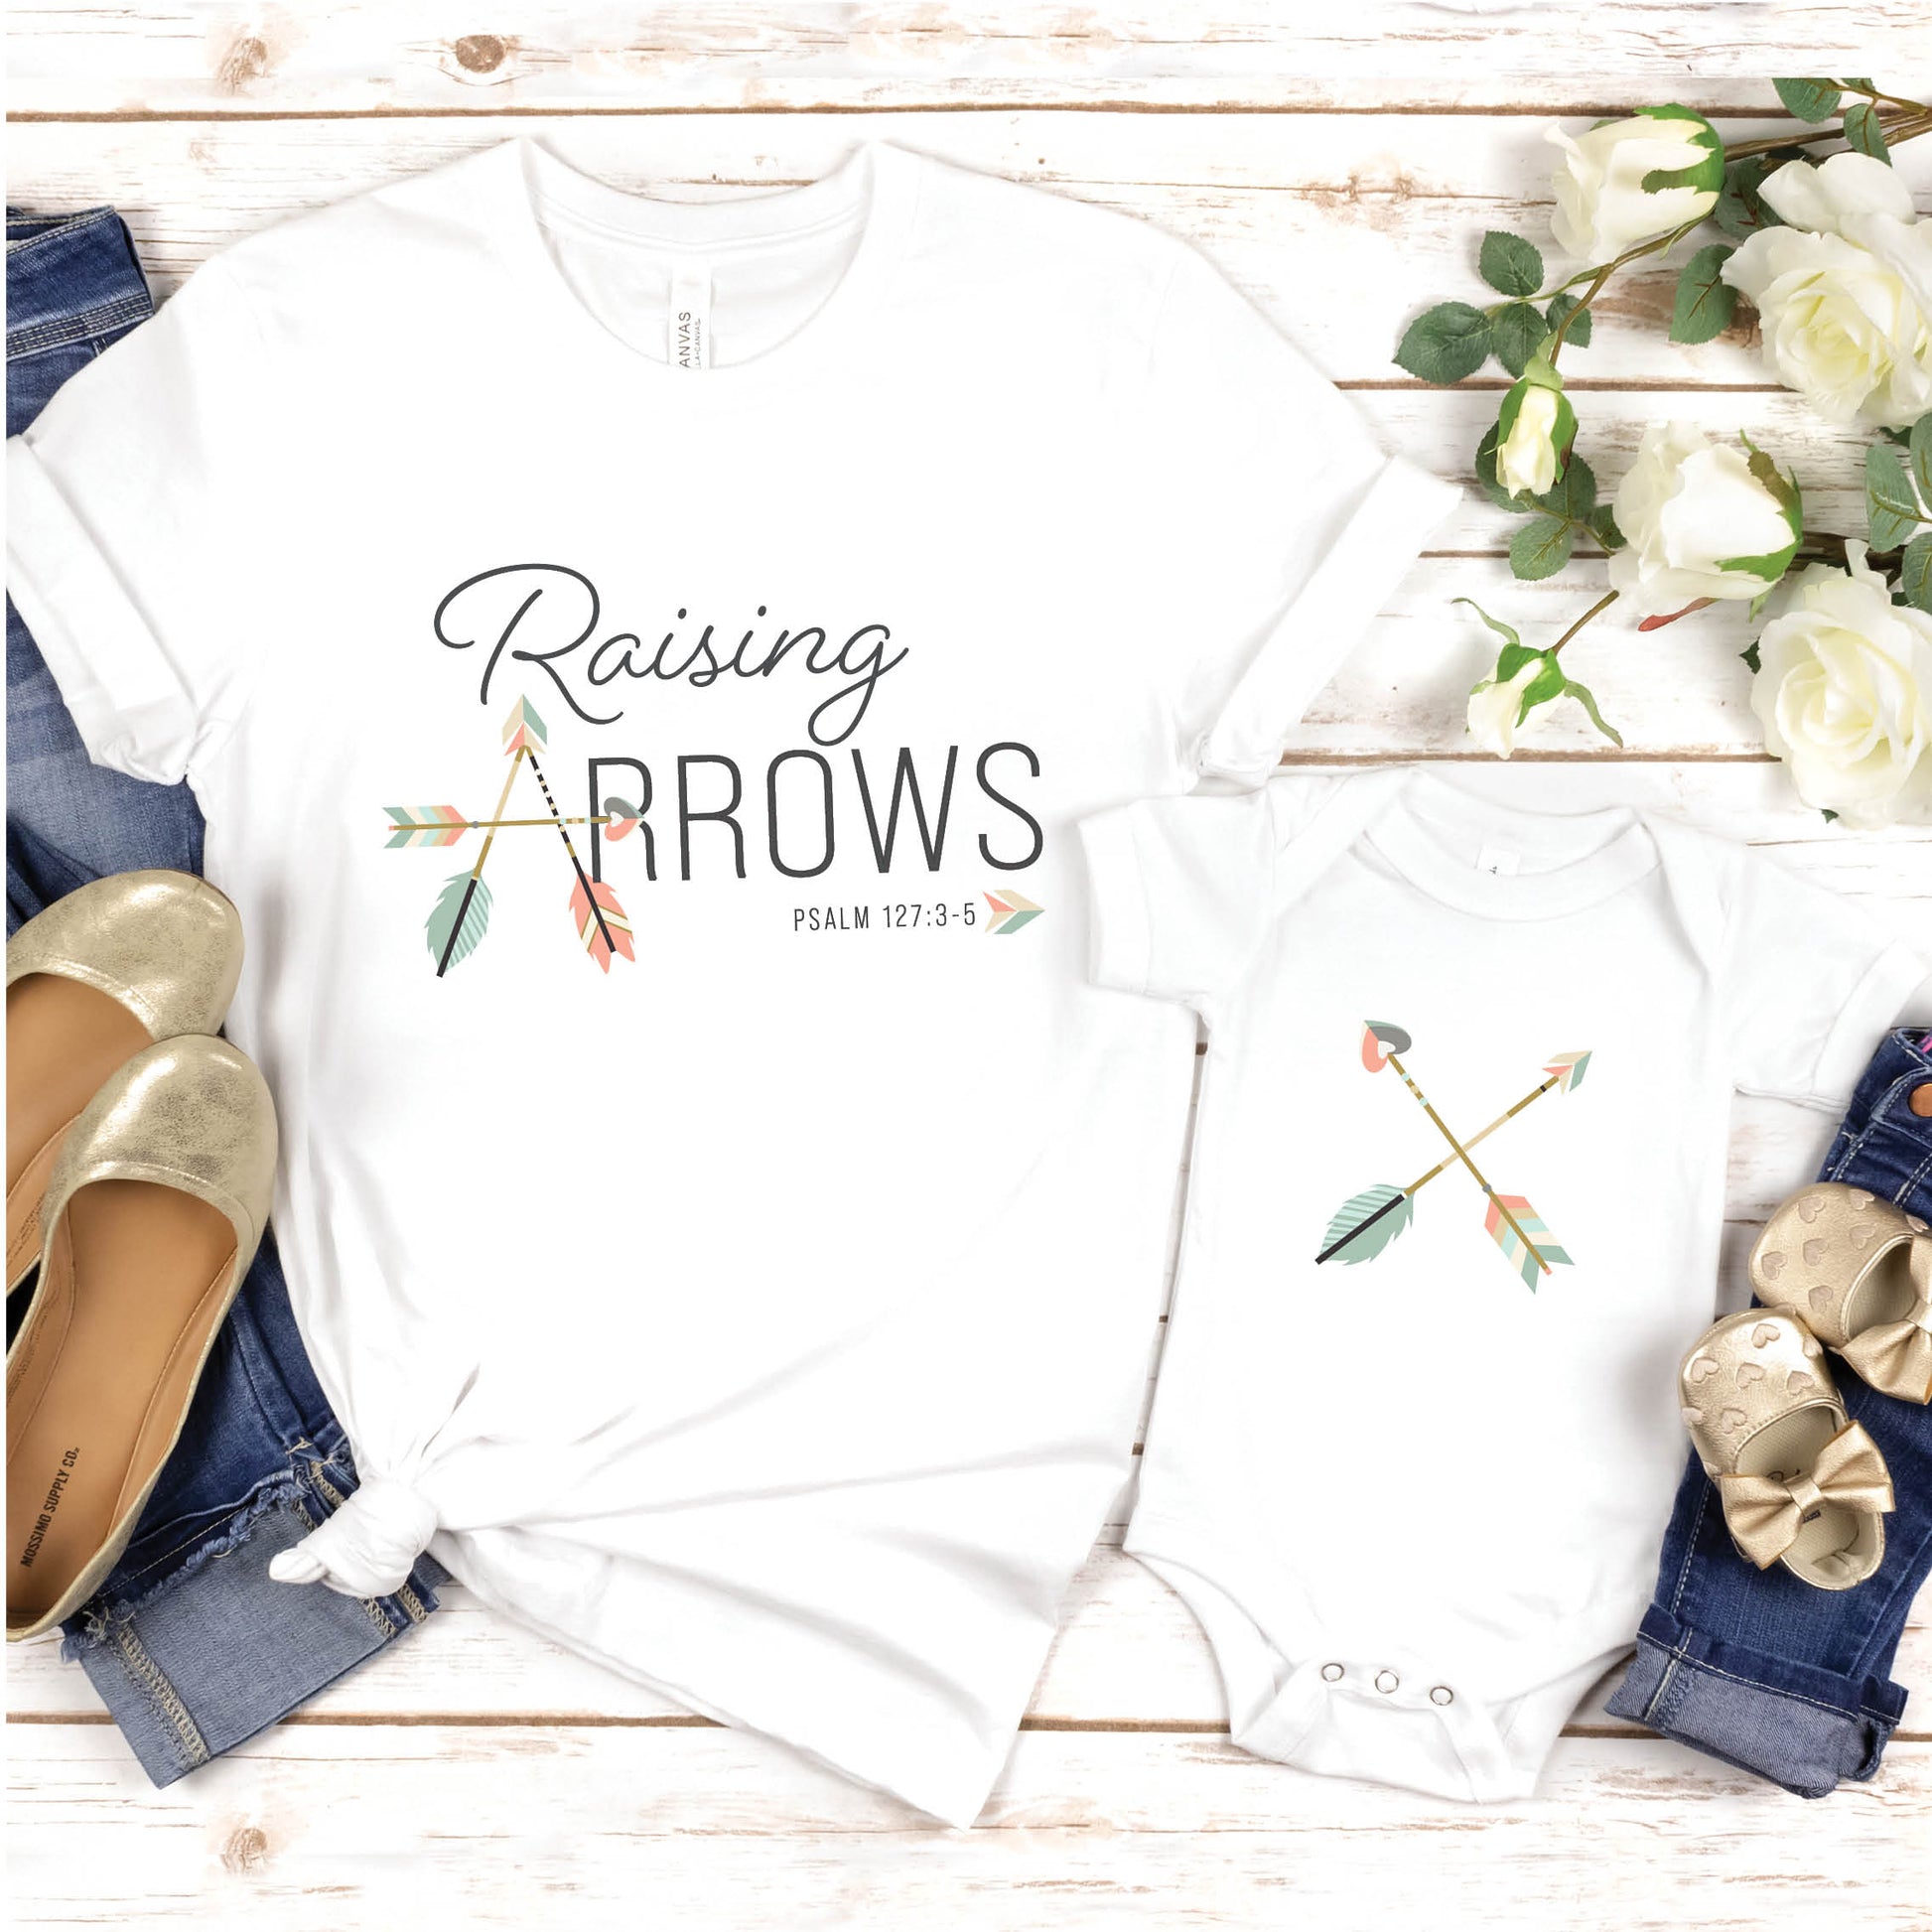 White and pastel boho arrow Christian aesthetic faith-based t-shirt and matching mommy-and-me onesie with Psalm 127:3-5 bible verse quote that says "Raising Arrows" blessed is the one with a quiver full of children, perfect for homeschool moms and kids